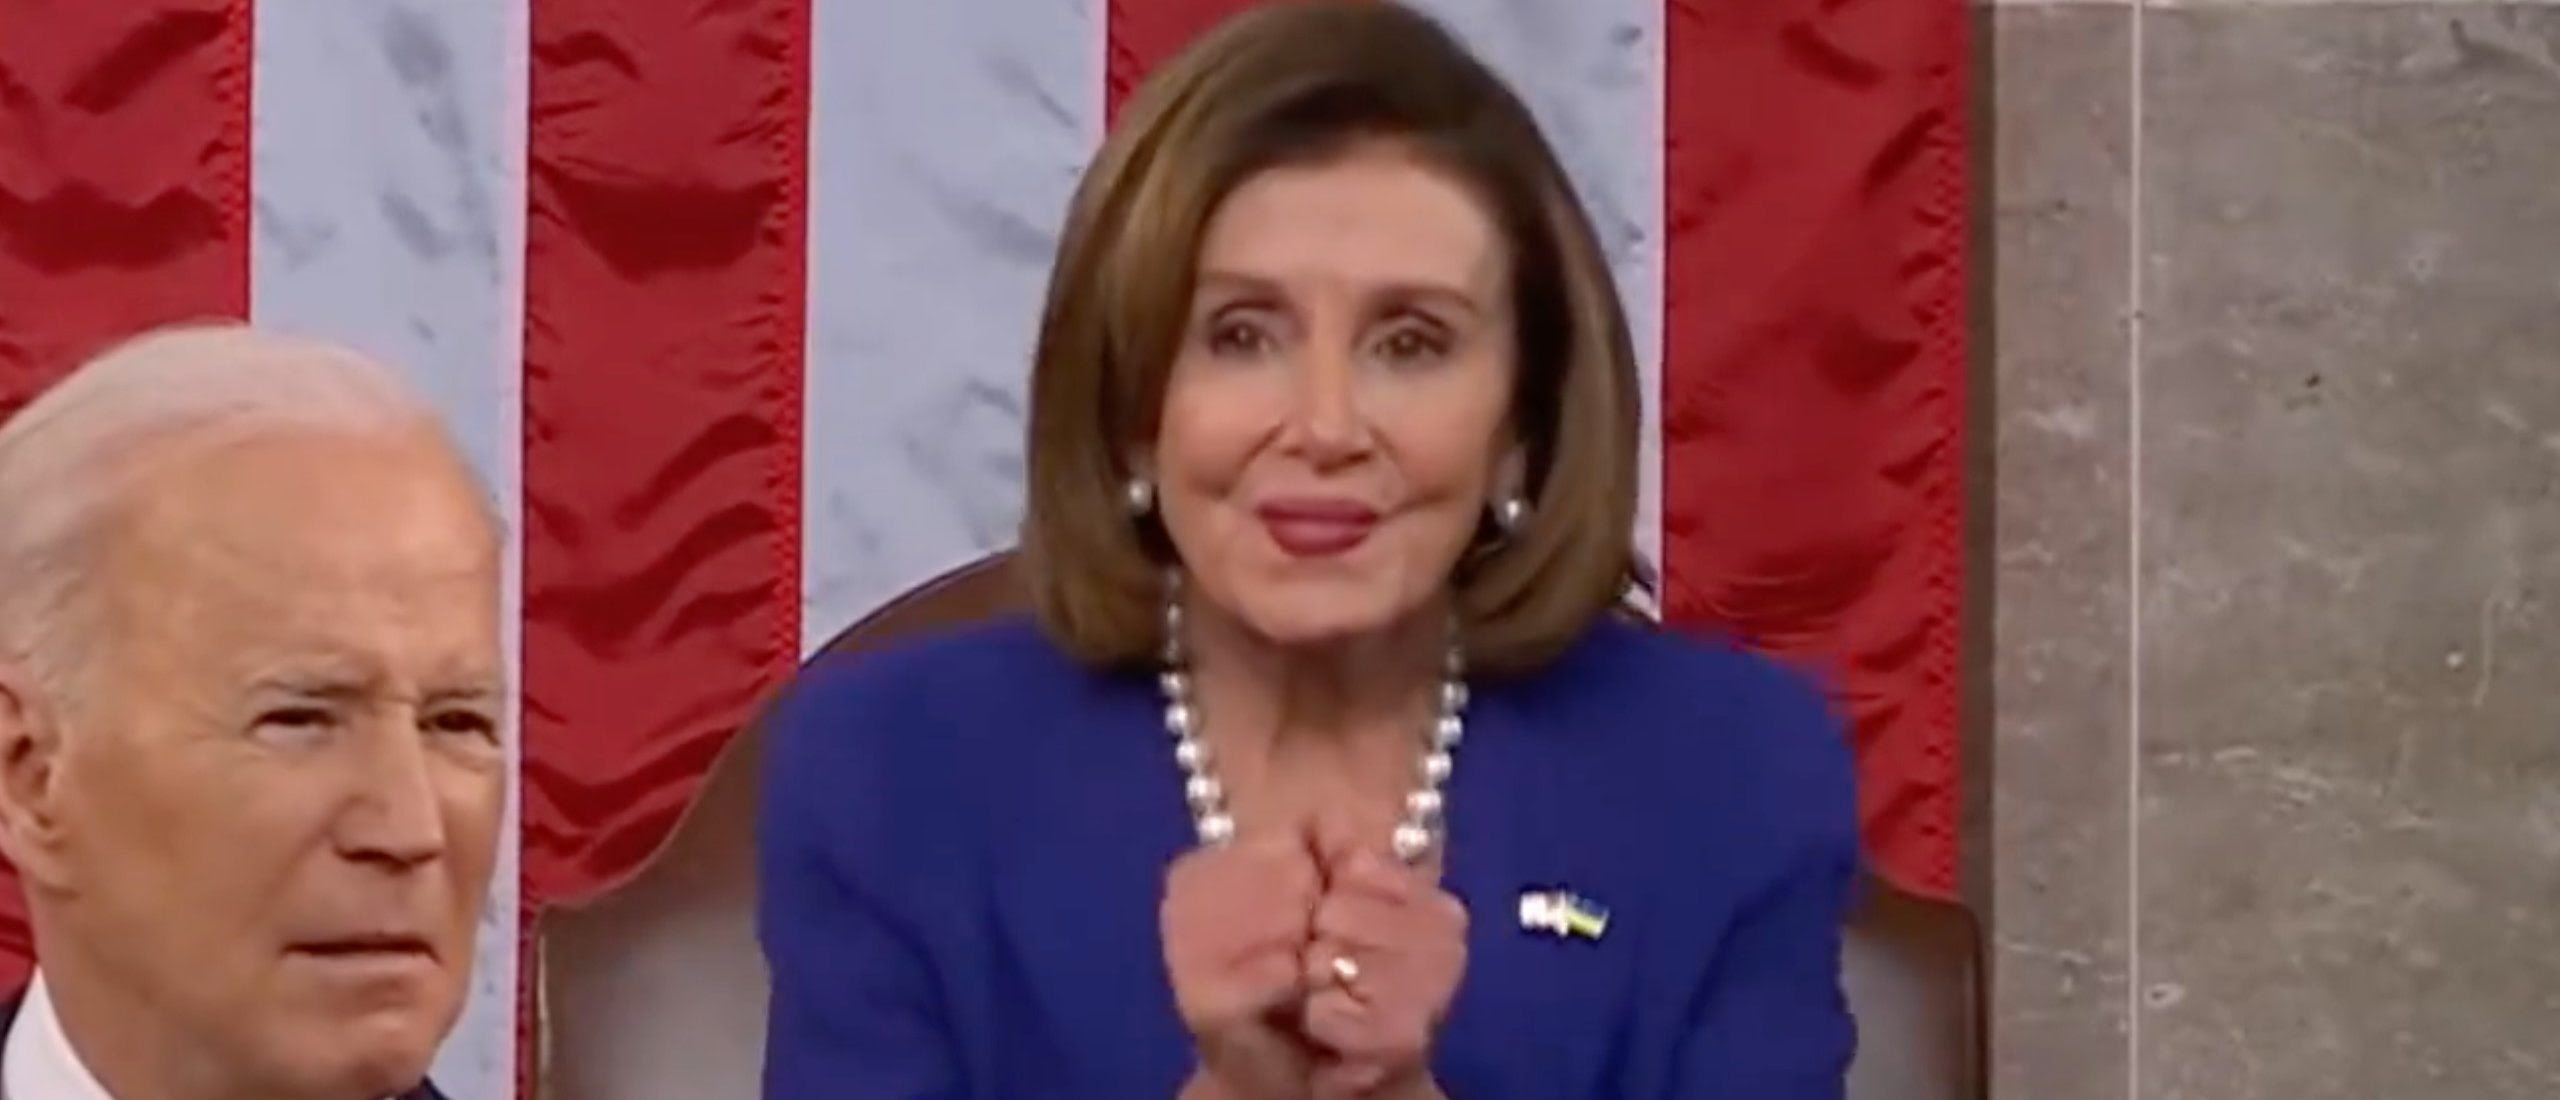 Pelosi Had A Very Odd Reaction To Biden Talking About Soldiers Breathing In Toxic Smoke. It’s About To Go Viral